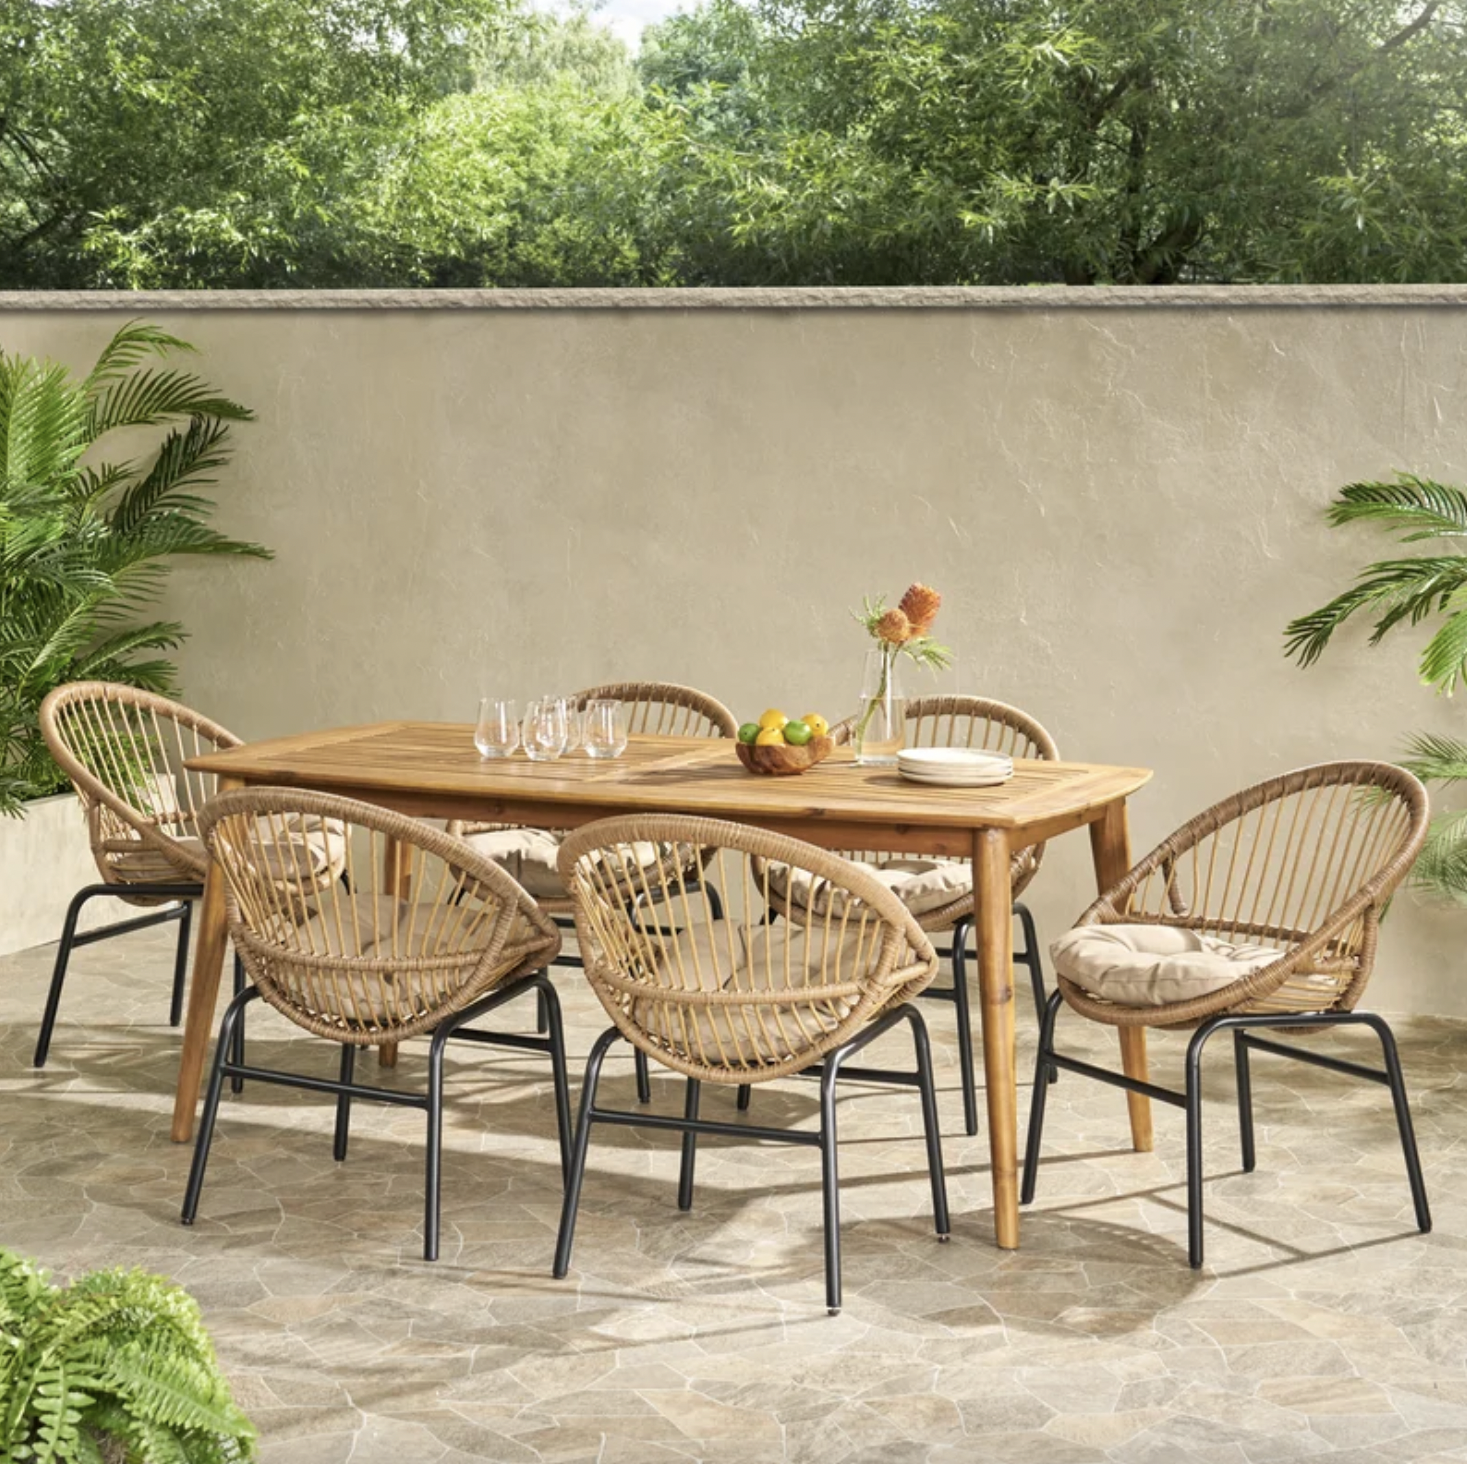 Wayfair's Best-Selling Outdoor Furniture Is Going for up to 75% off Right Now